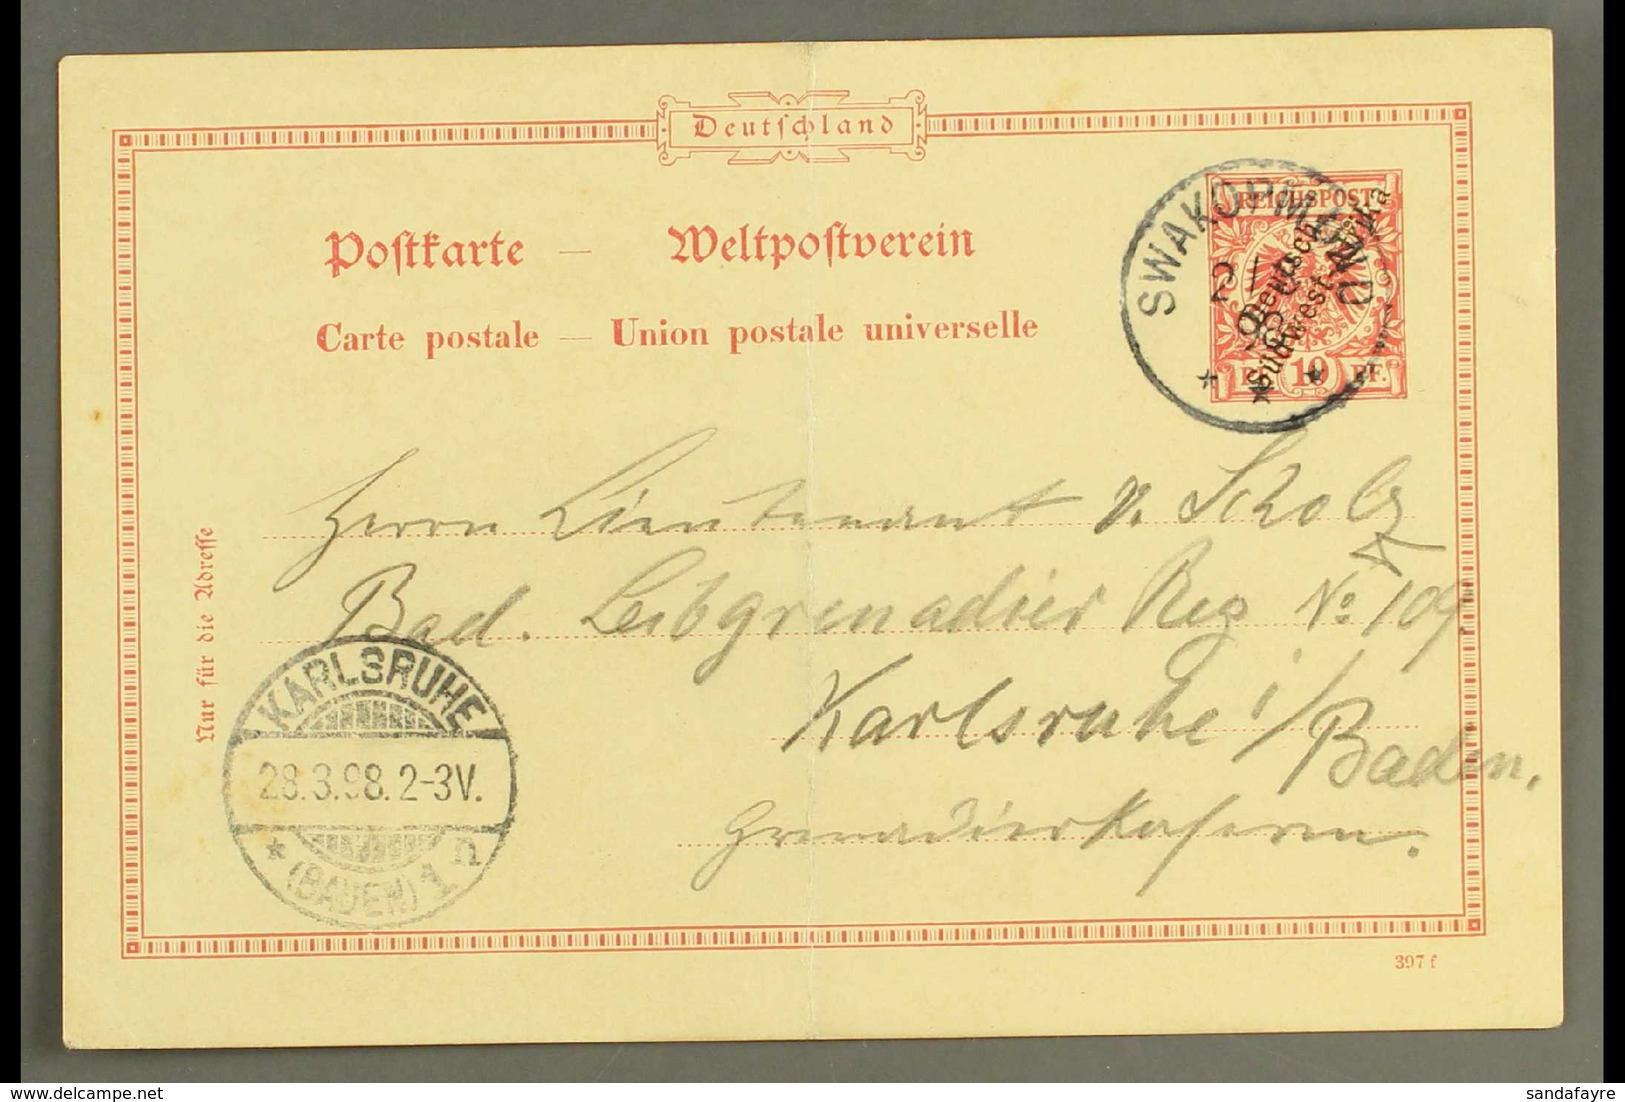 SOUTH WEST AFRICA 1898 (3 Mar) 10pf With Diagonal Opt Postal Stationery Card To Germany Cancelled By Fine "SWAKOPMUND" C - Autres & Non Classés